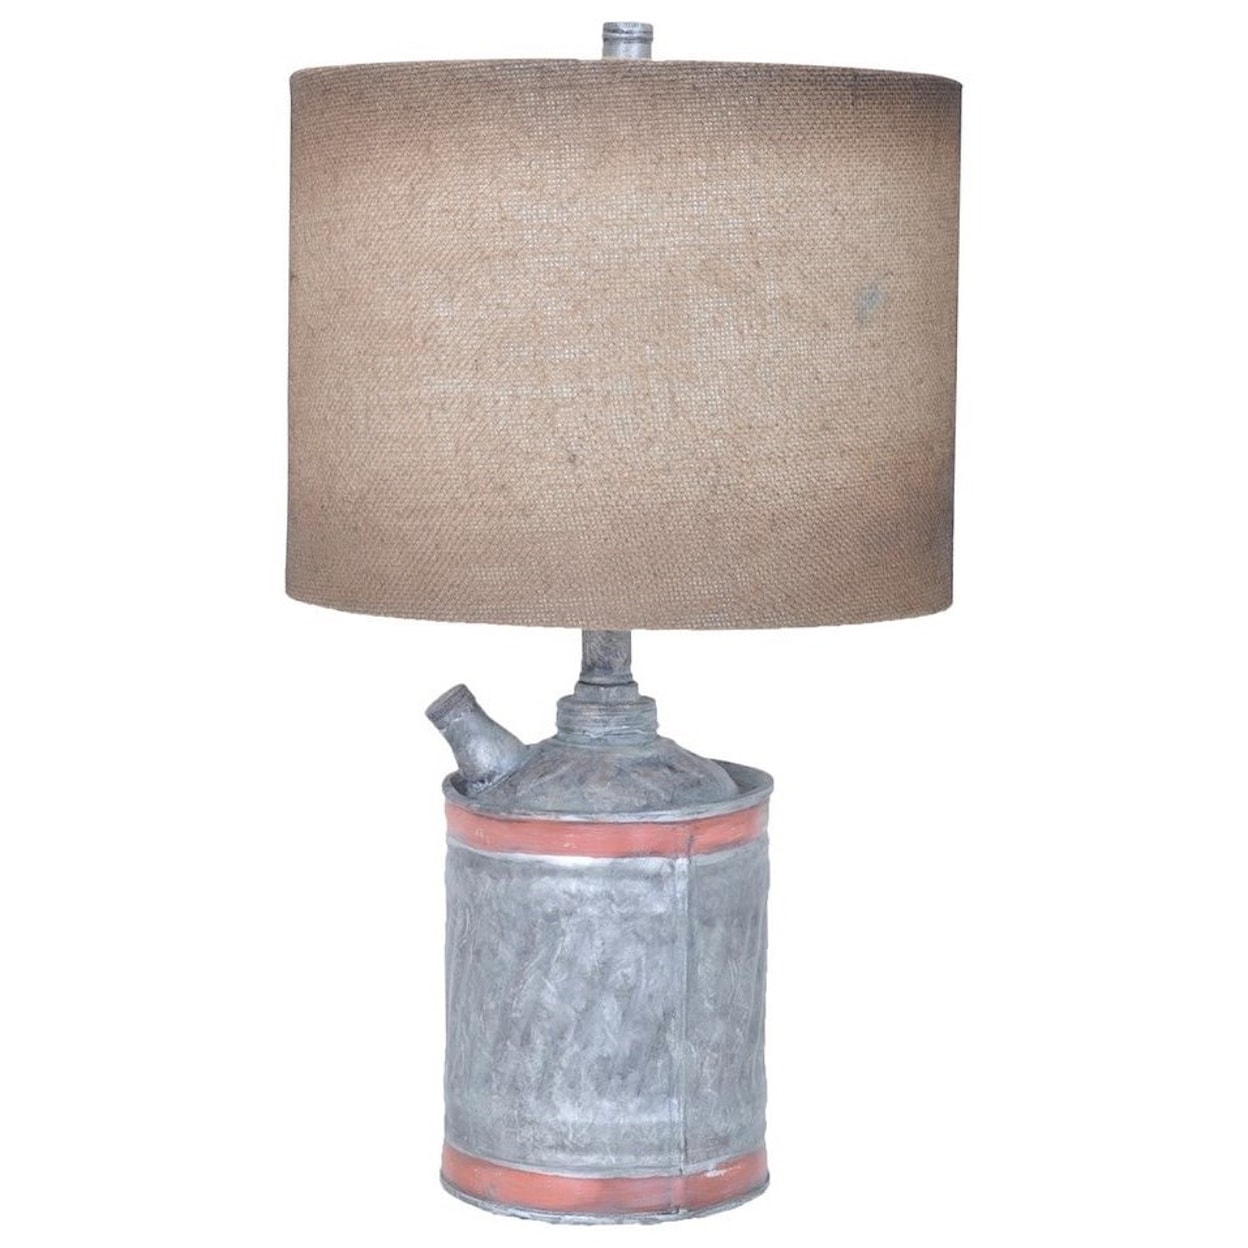 Crestview Collection Lighting Filler Up Table Lamp